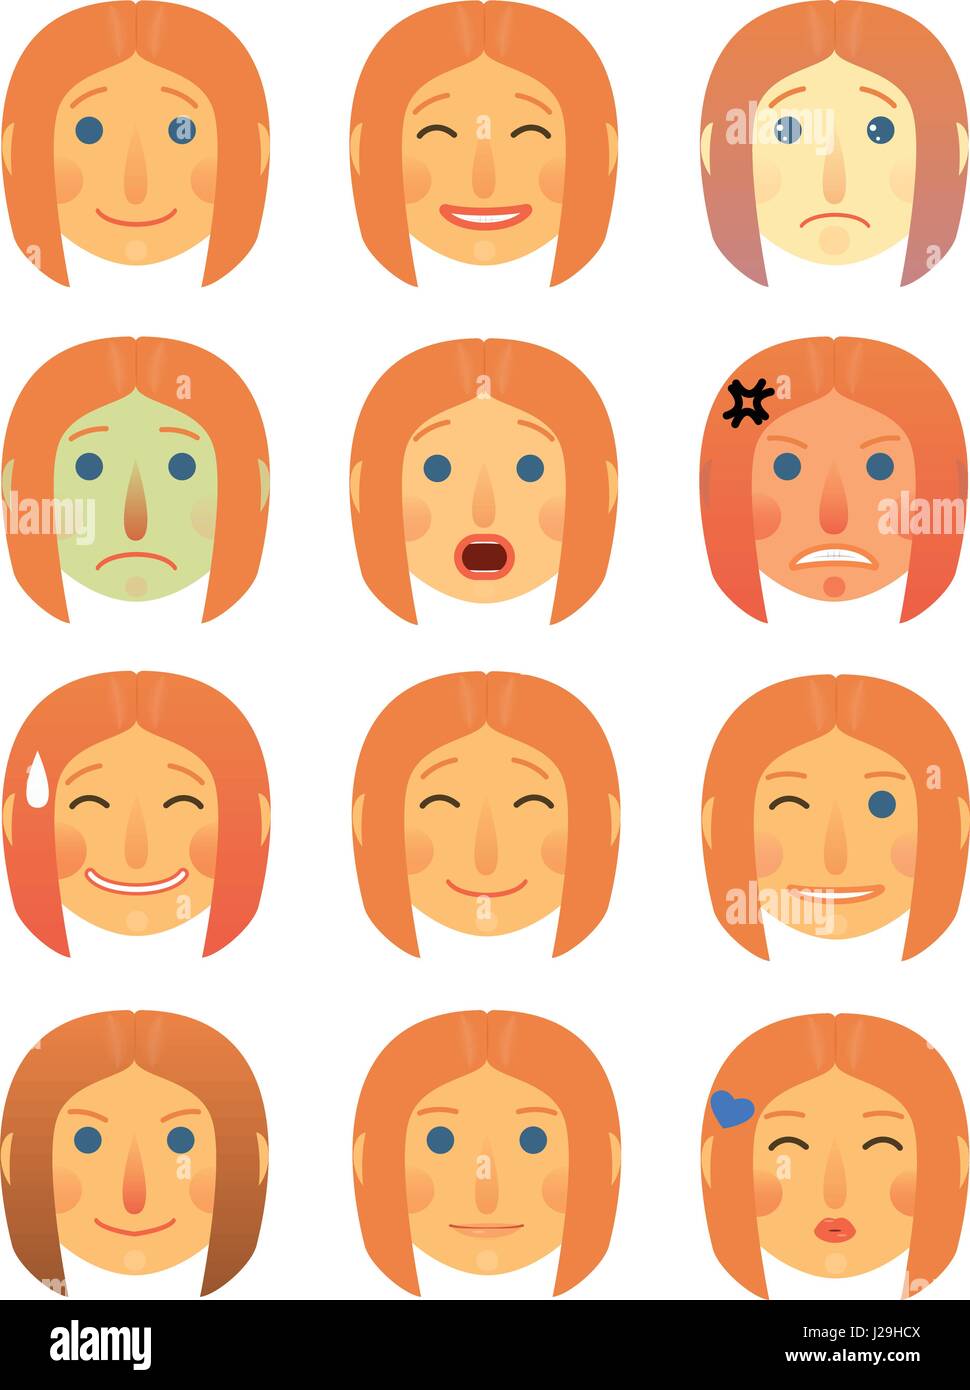 girl or woman different face emotions collection cartoon flat - Emoji emoticon icon illustration set. Face on a white background, isolated. Stock Vector